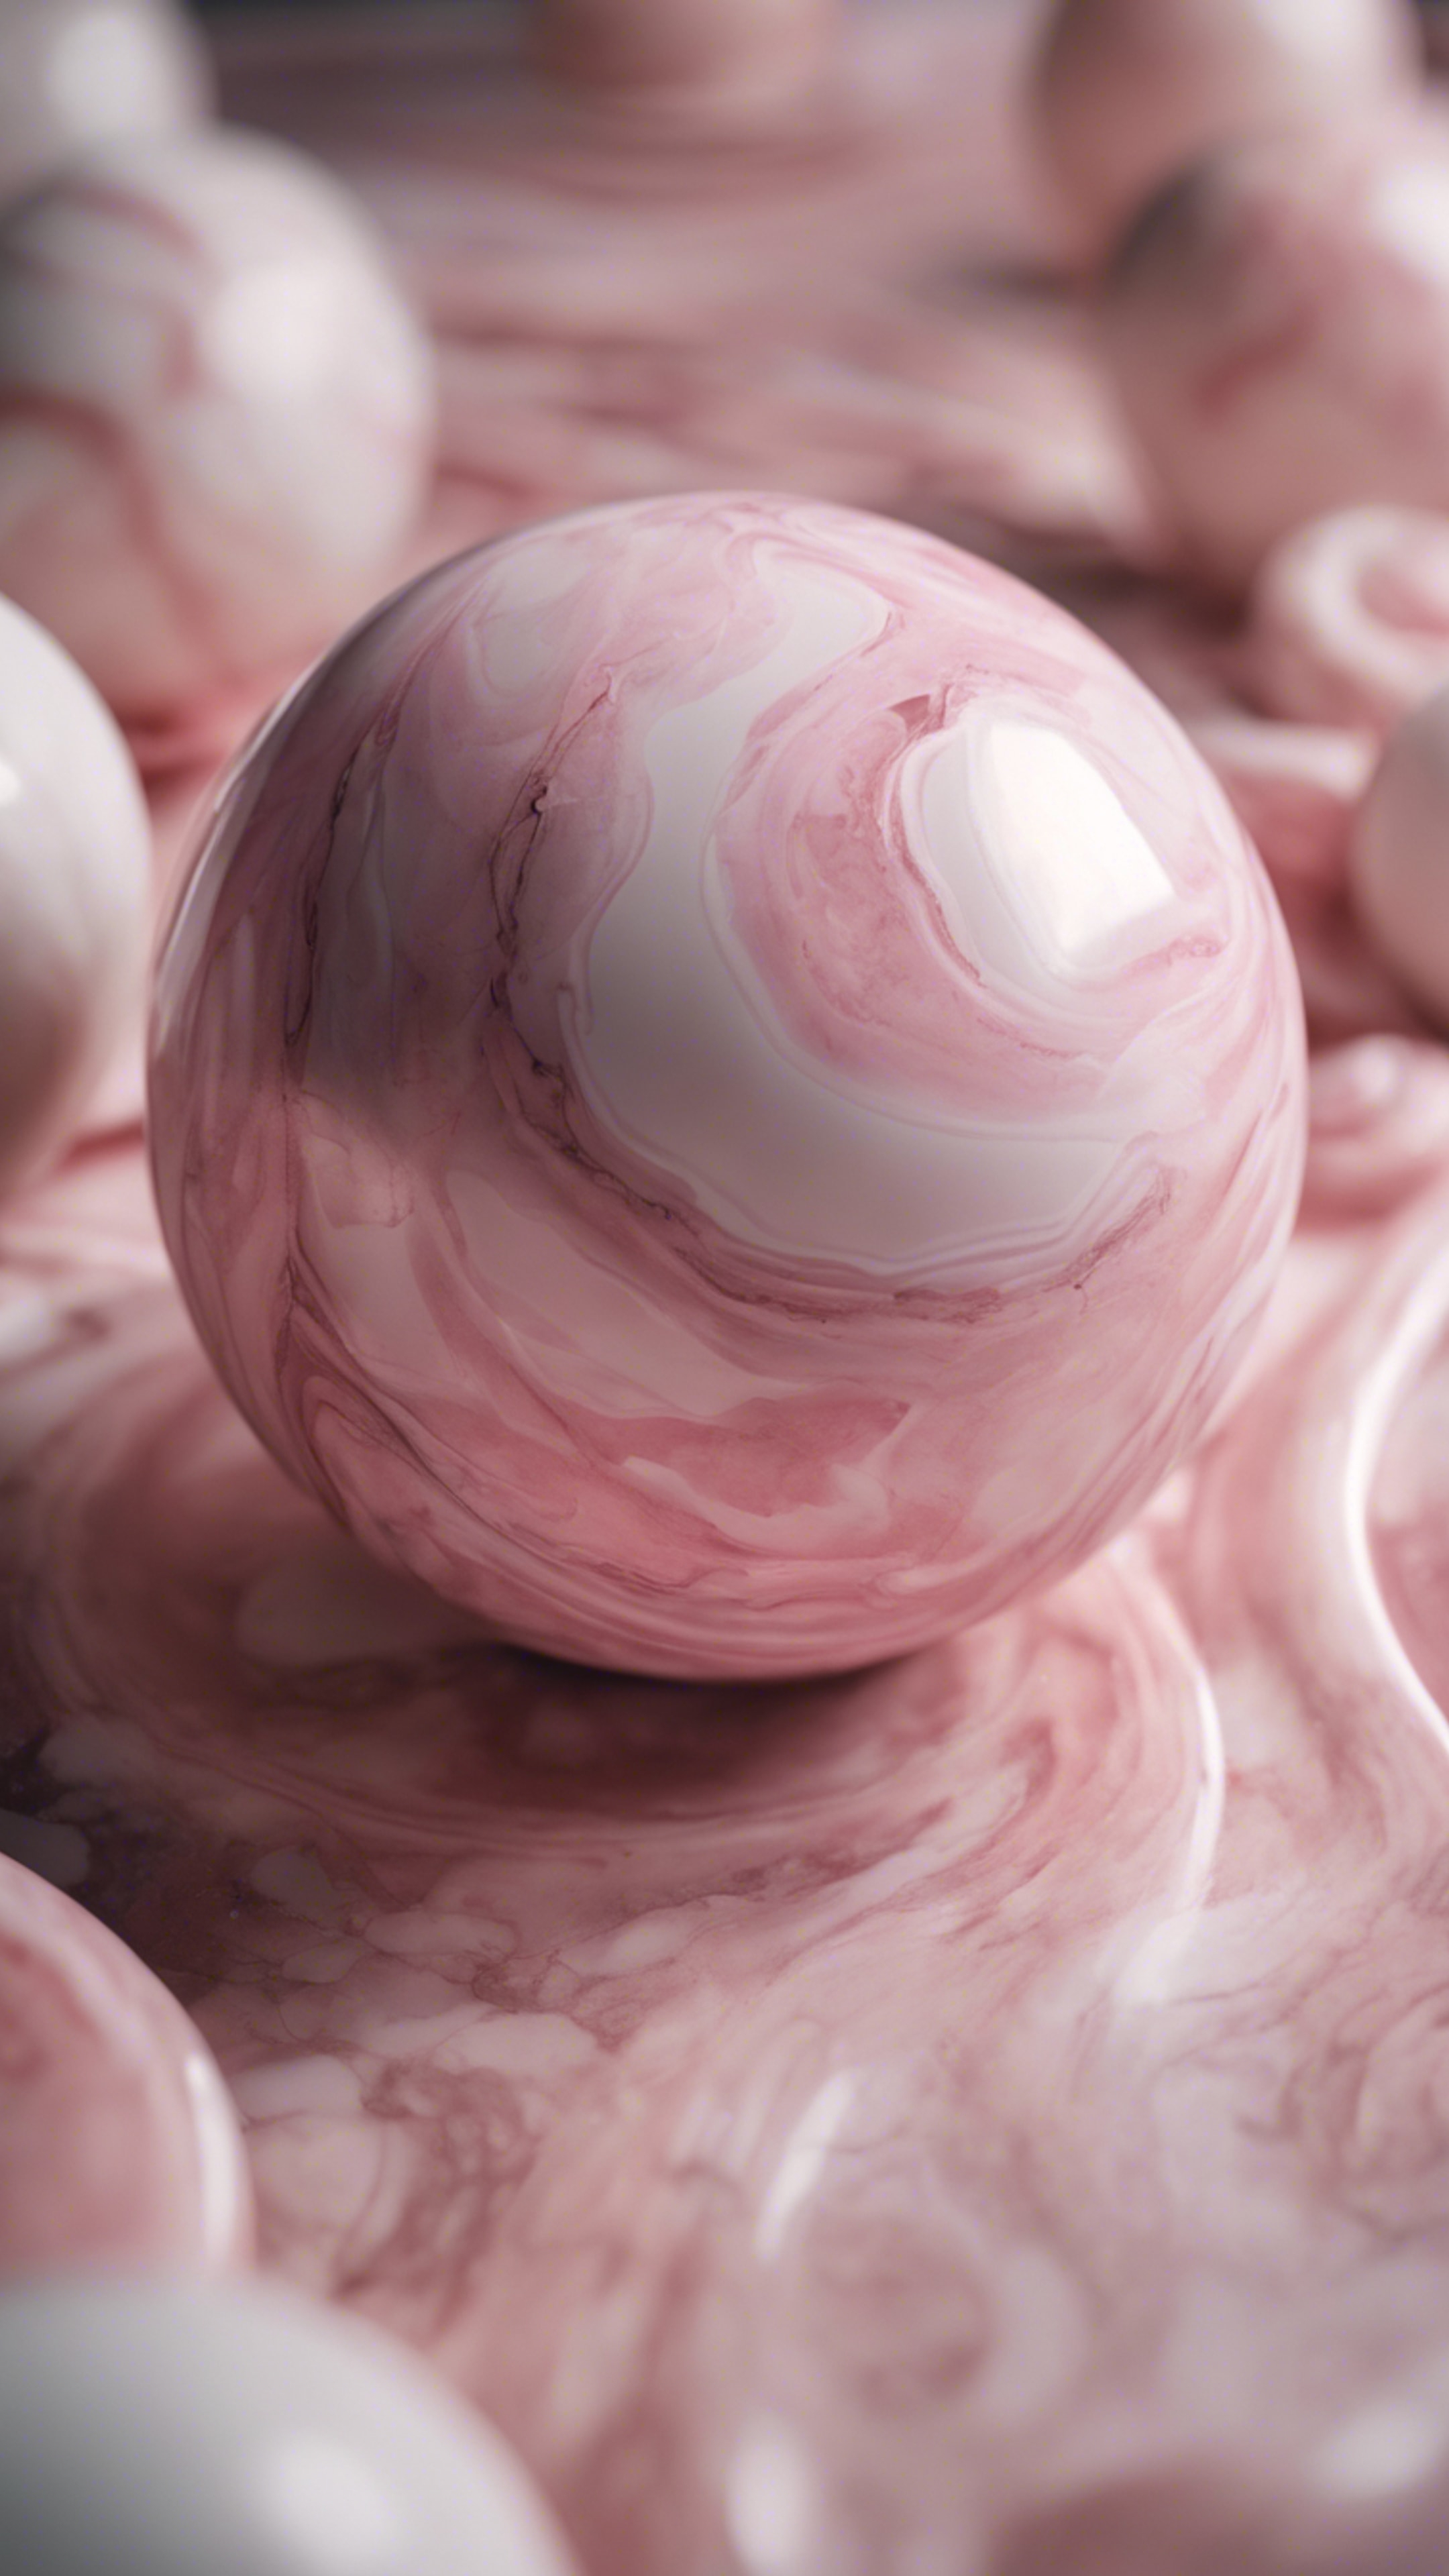 A ball made of swirls of soft pink and white marble.壁紙[0b47fd6a50864845acd3]